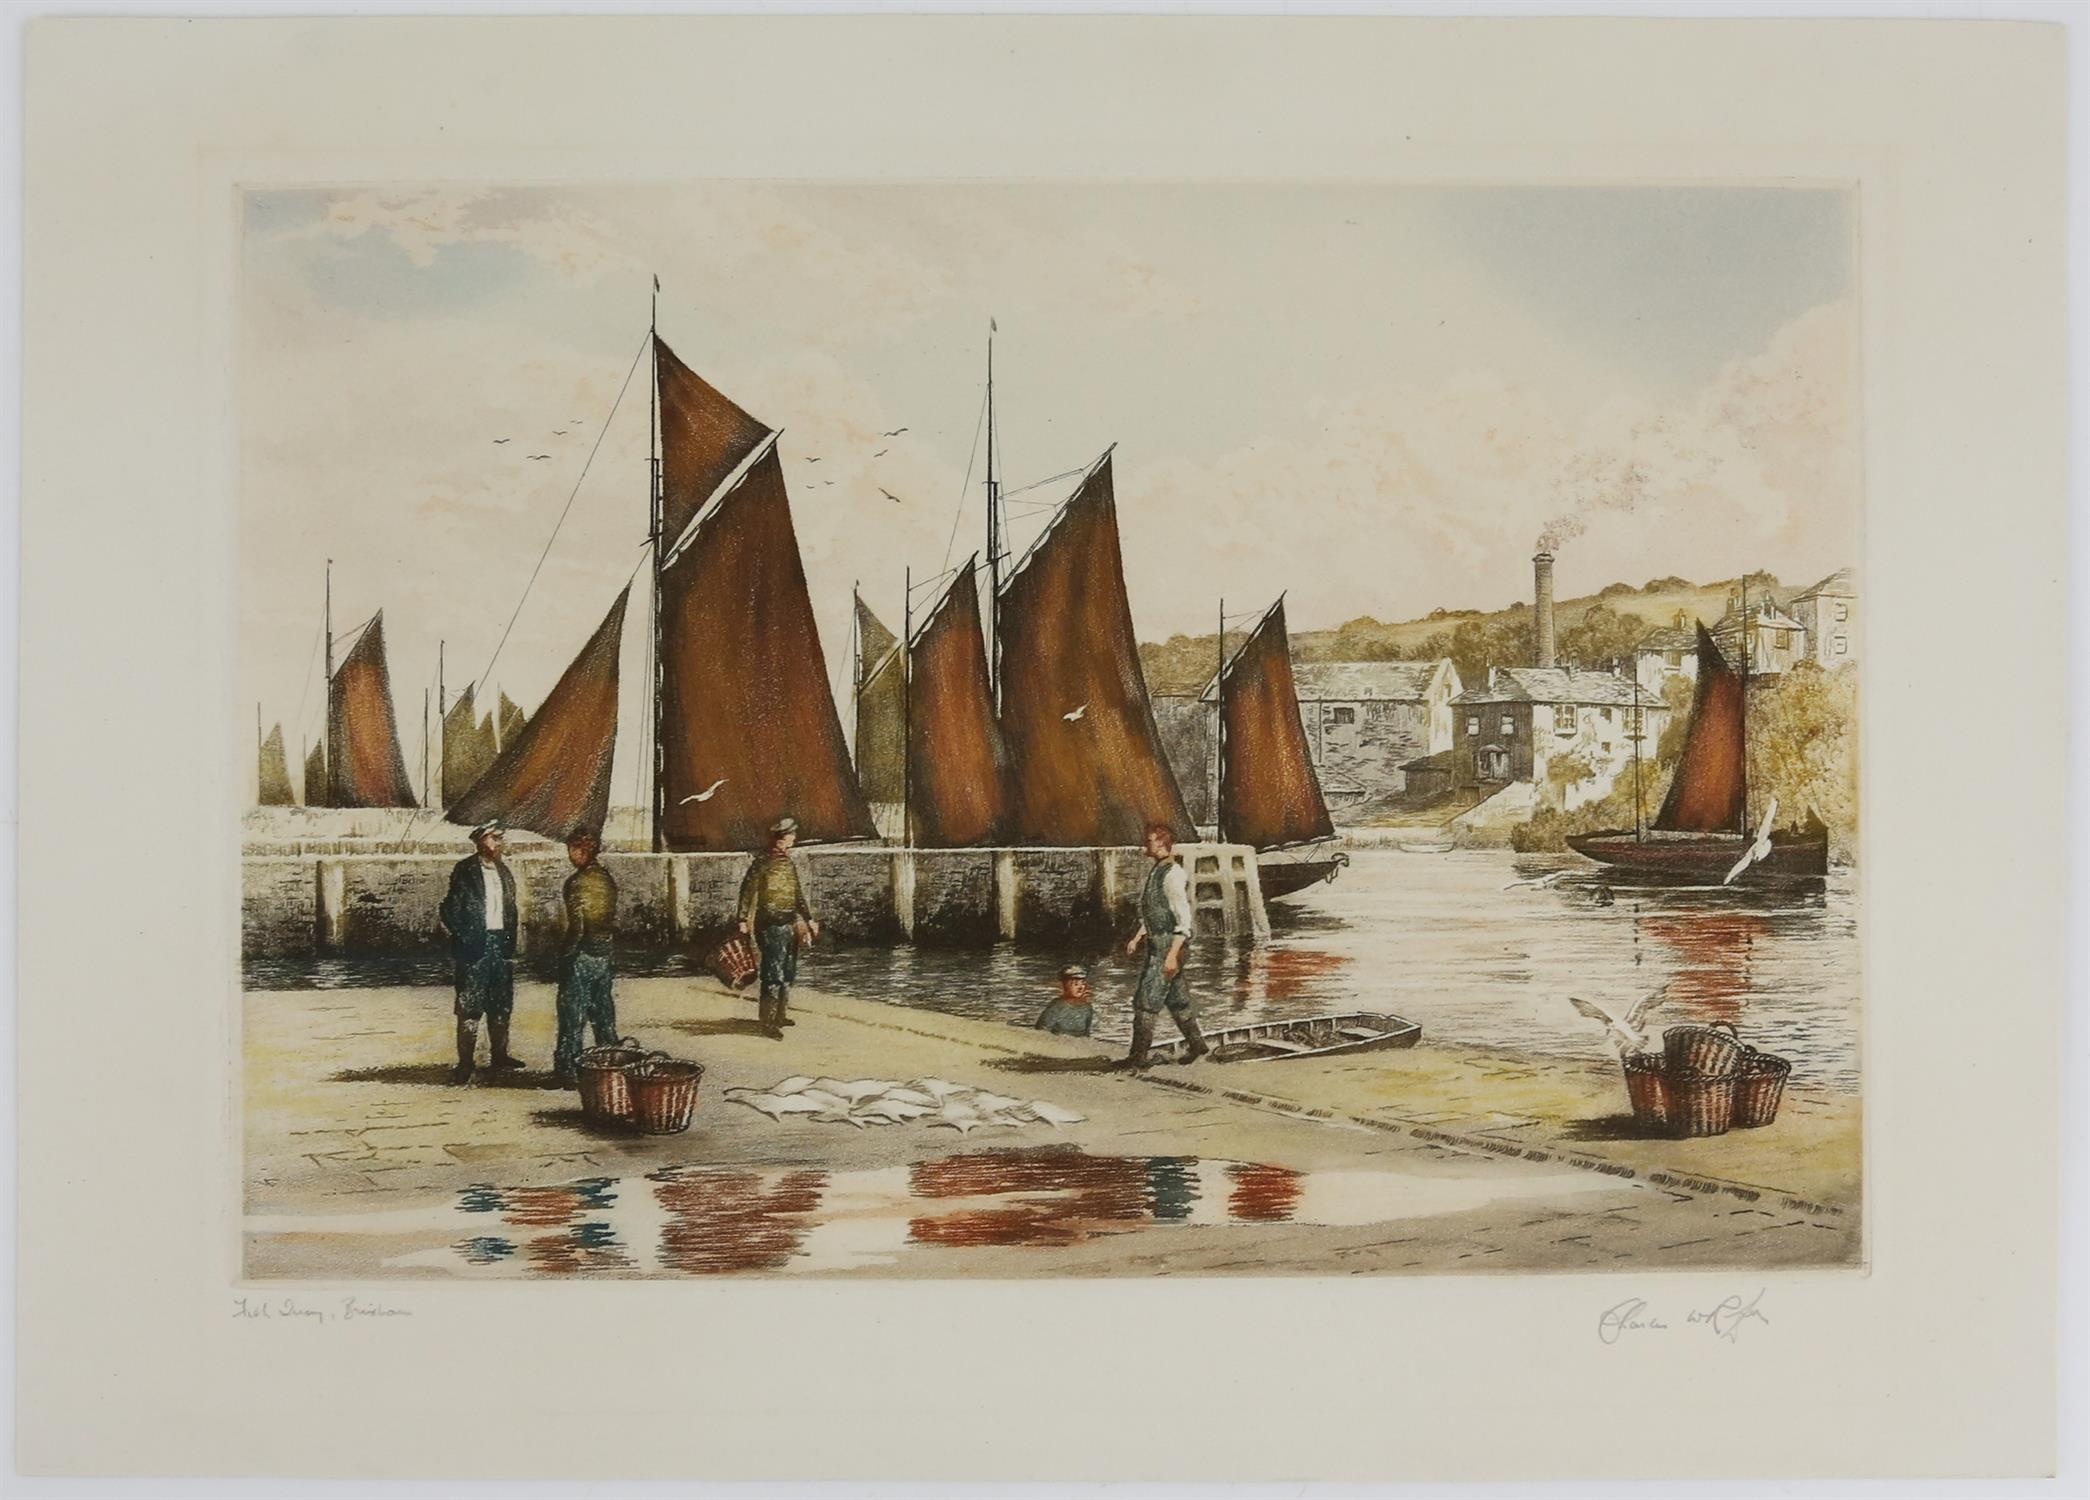 Charles Riley 'Brixham boats' etching printed in colour, signed indistinctly and titled in pencil. - Image 5 of 6